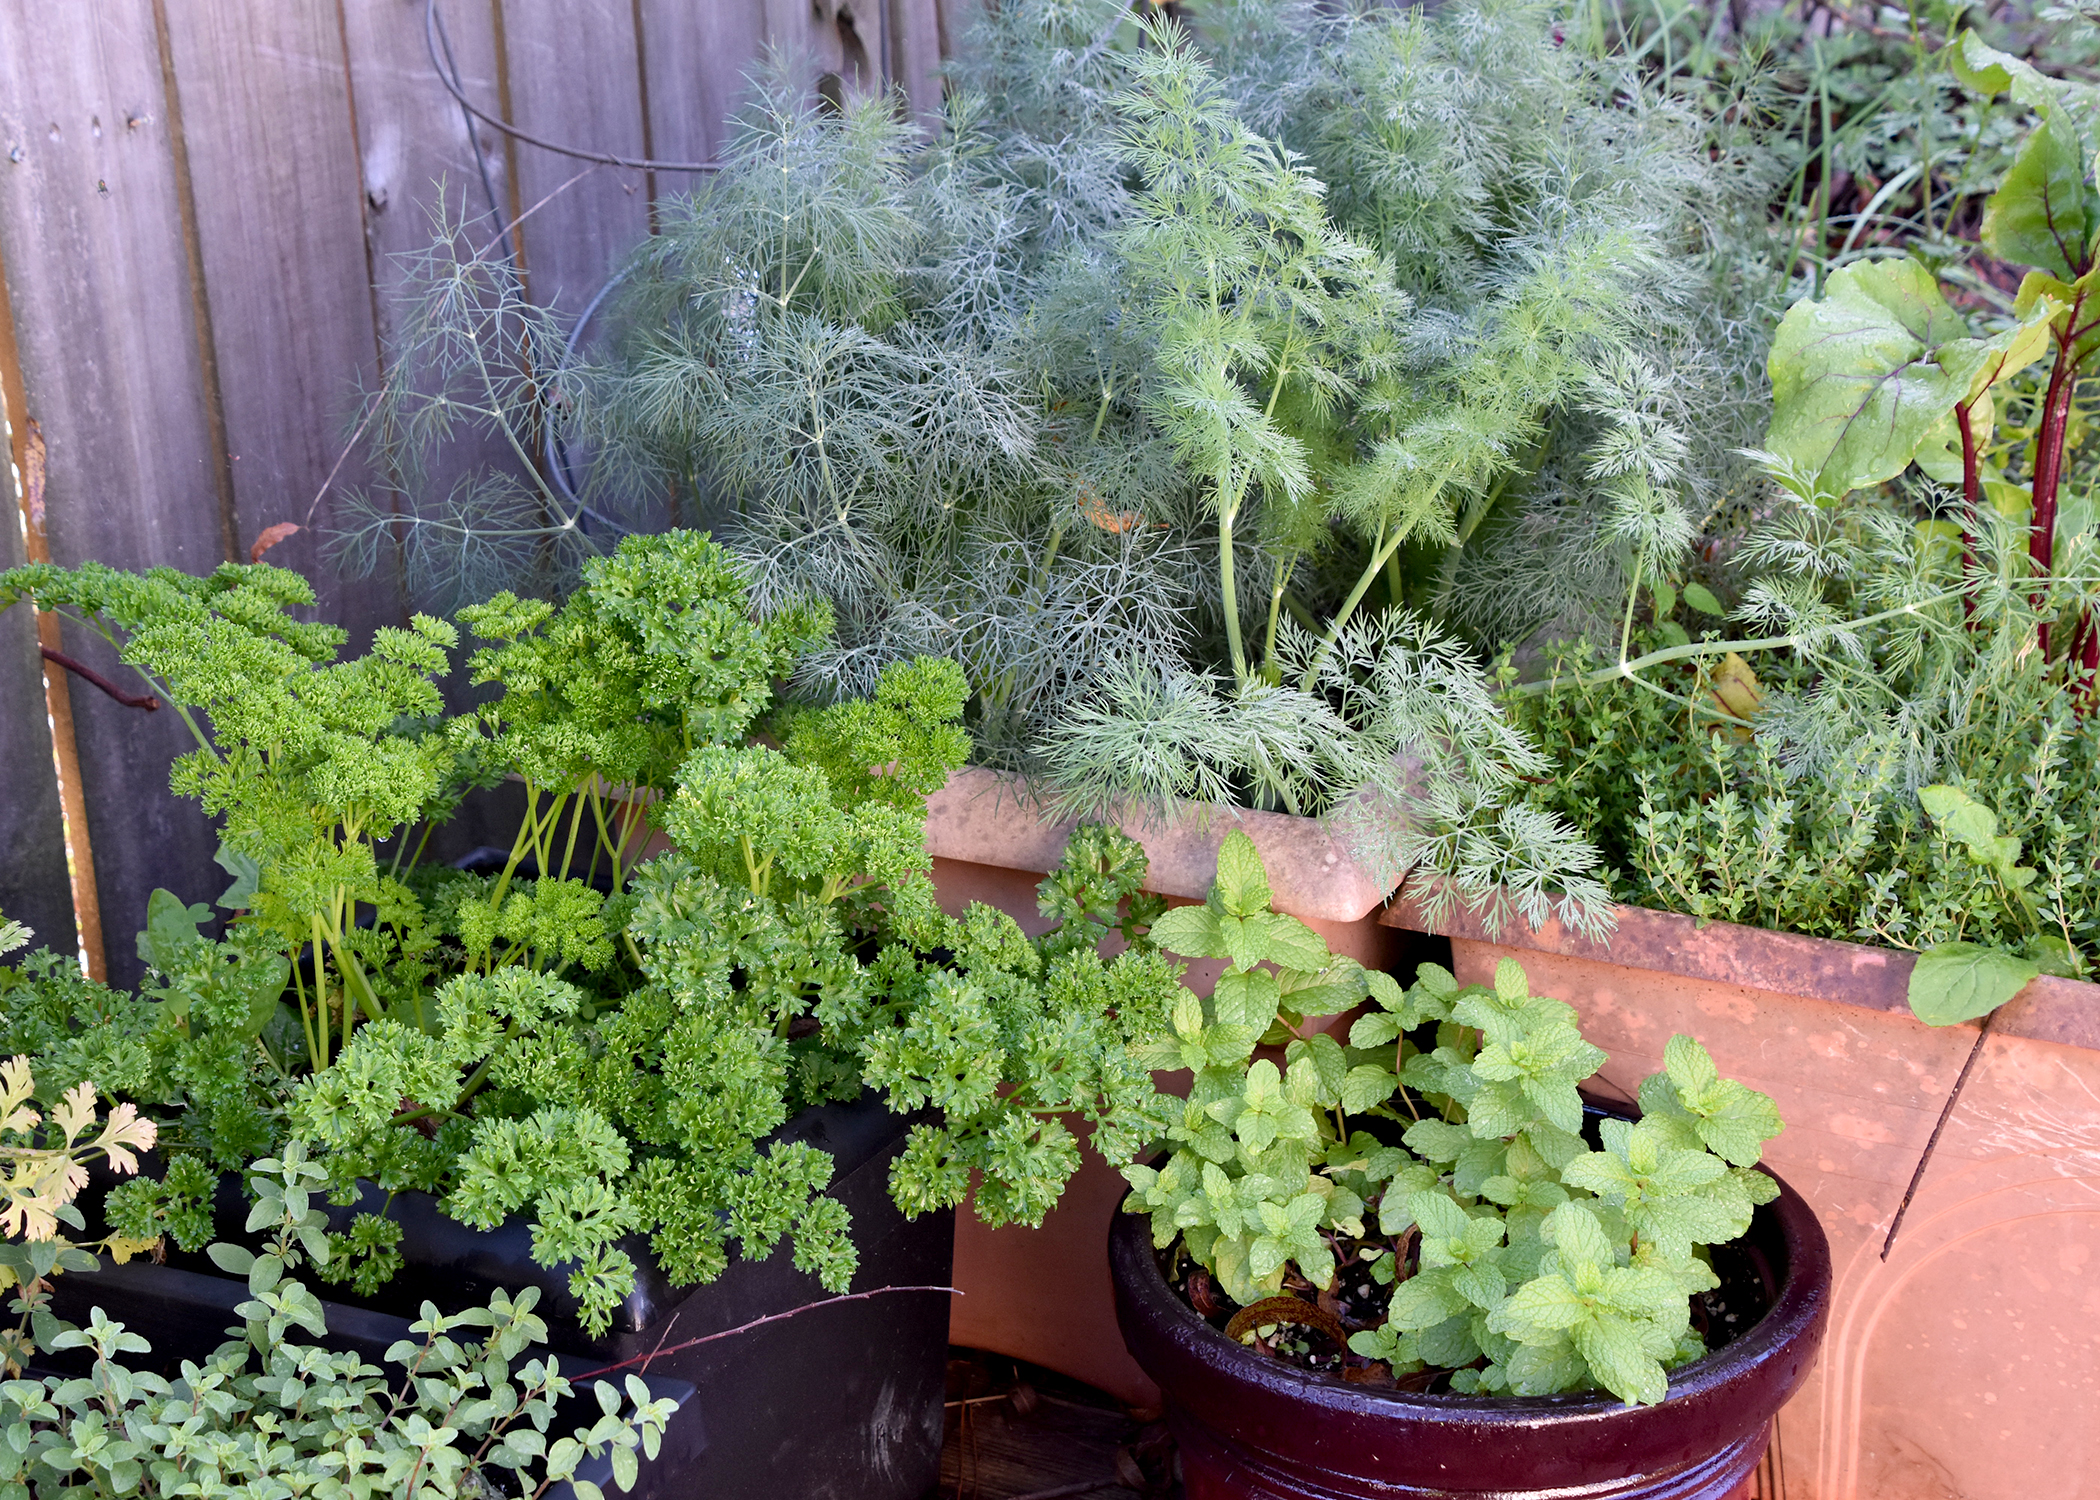 Bring container herb gardens near the house to add beauty to a patio and provide easy access to the kitchen. (Photo by MSU Extension/Gary Bachman)